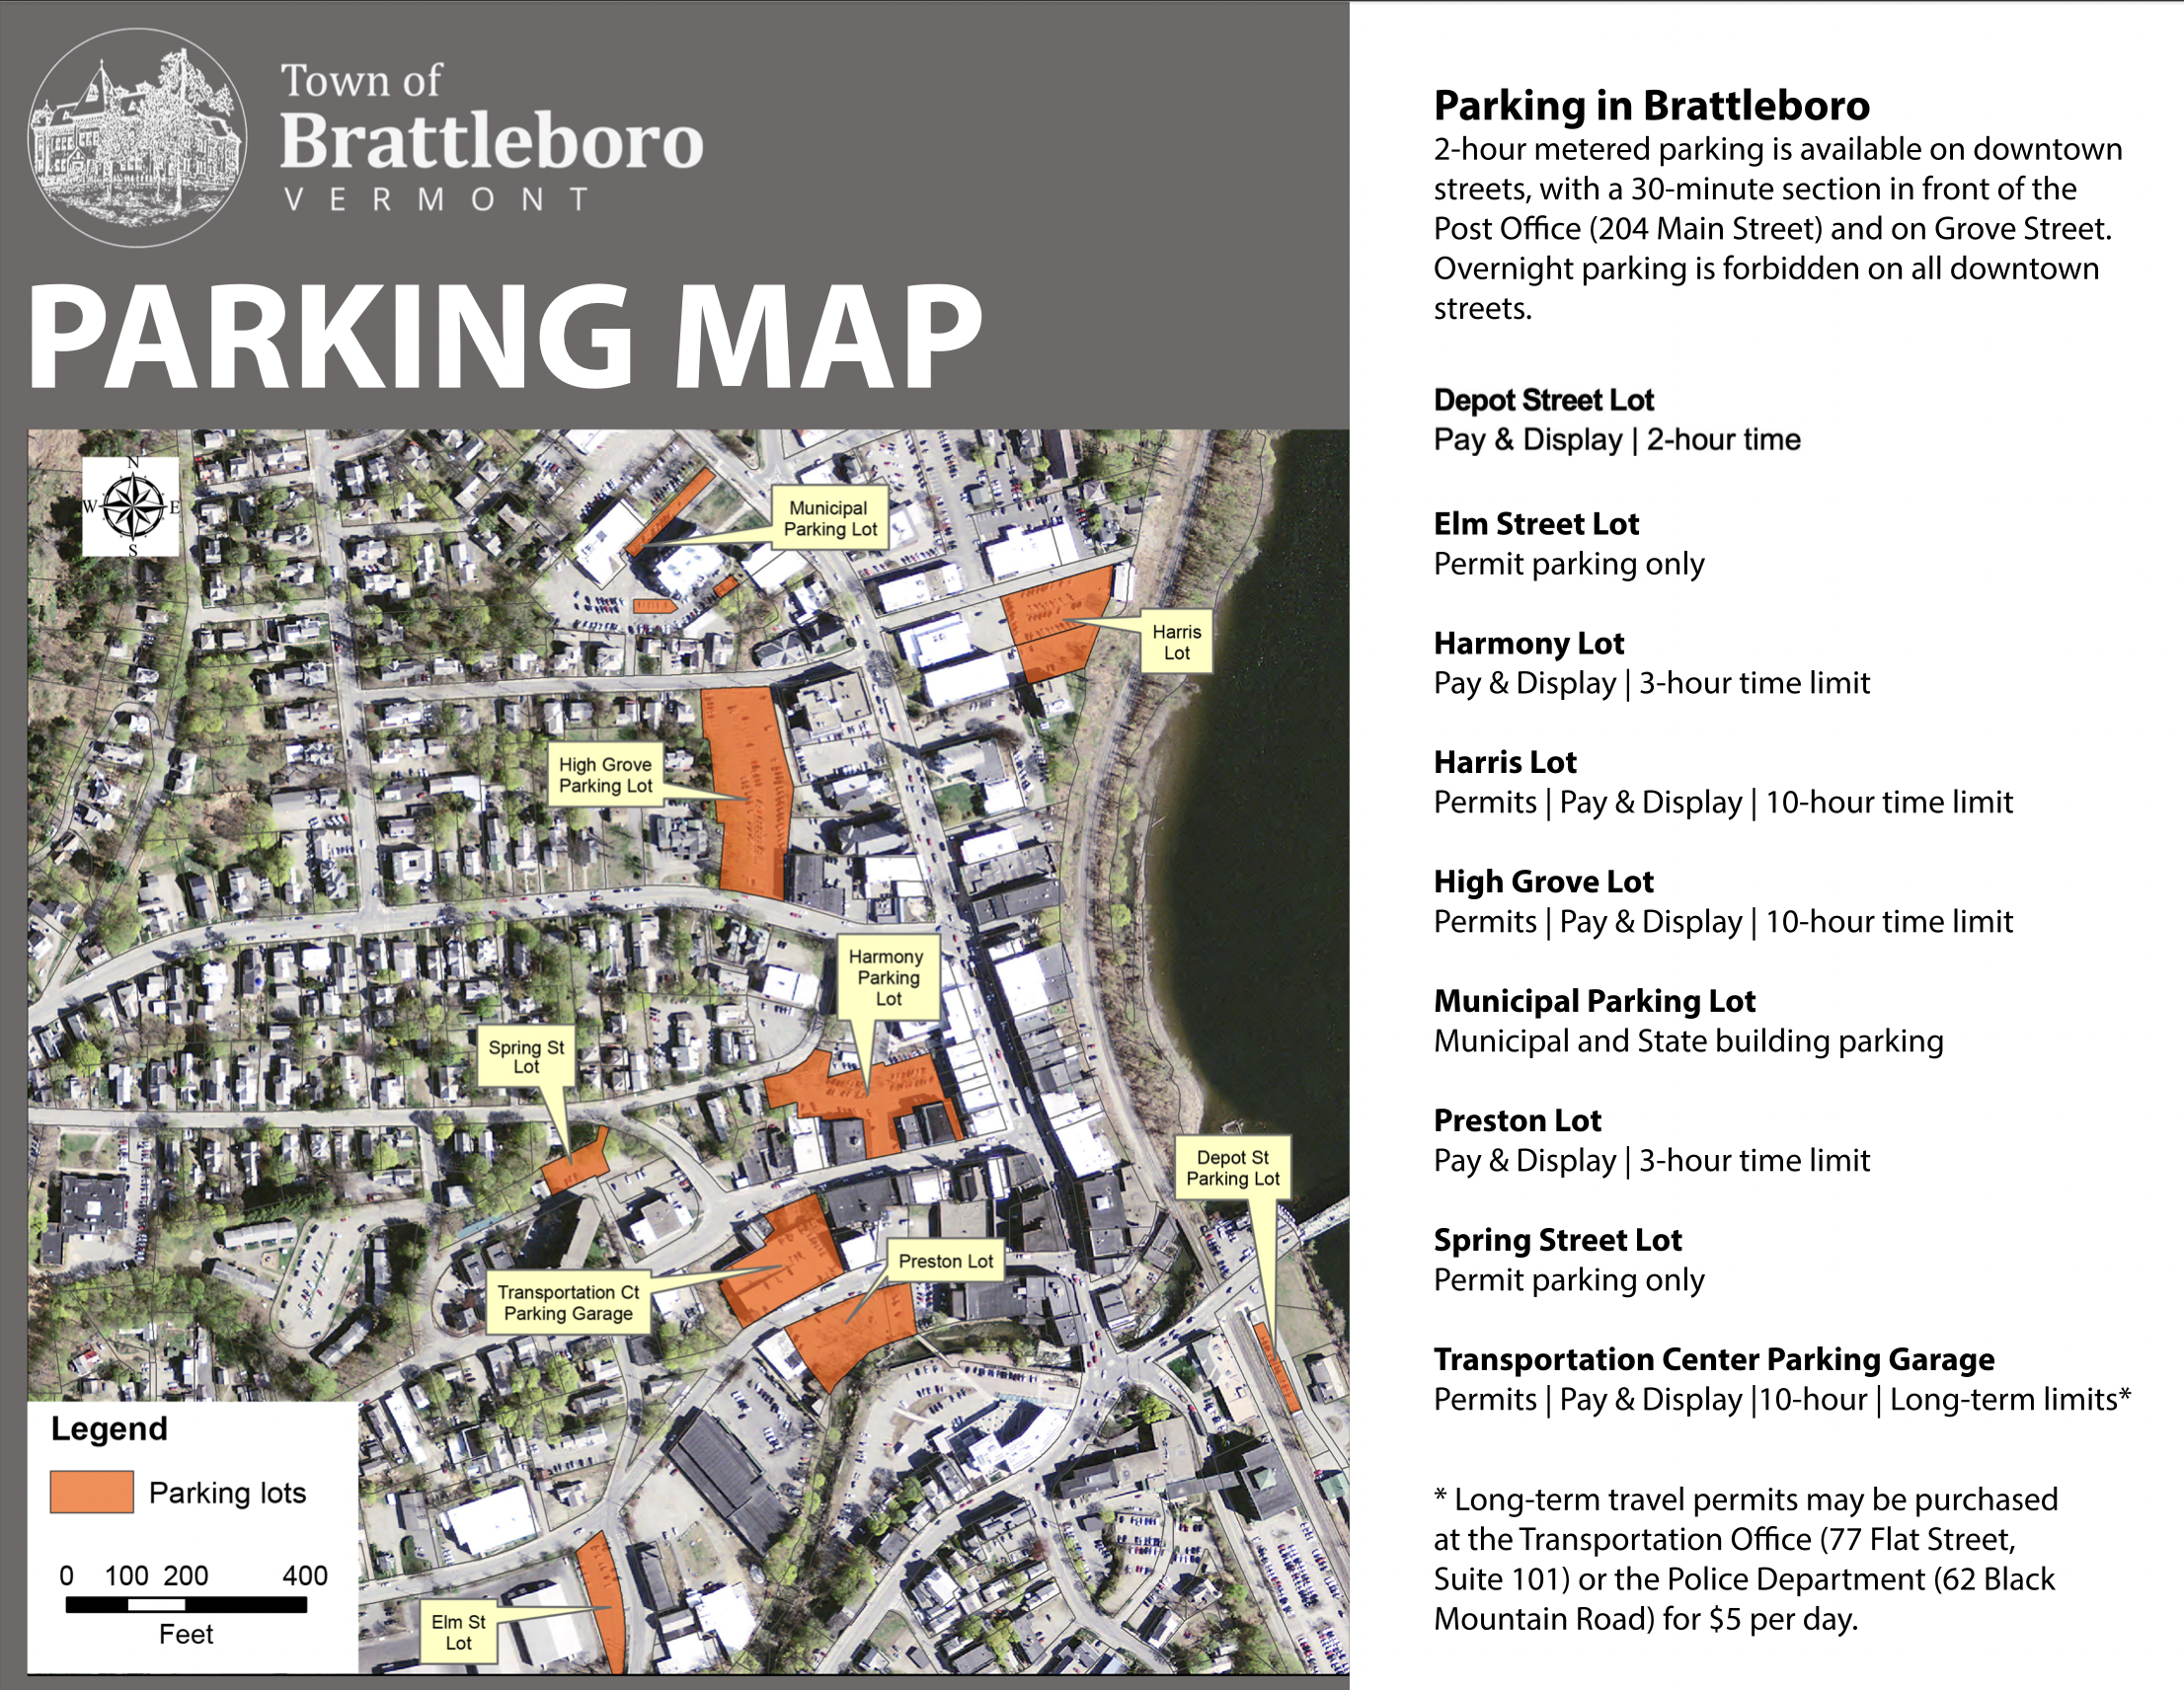 A map of parking lots in Downtown Brattleboro, Vermont